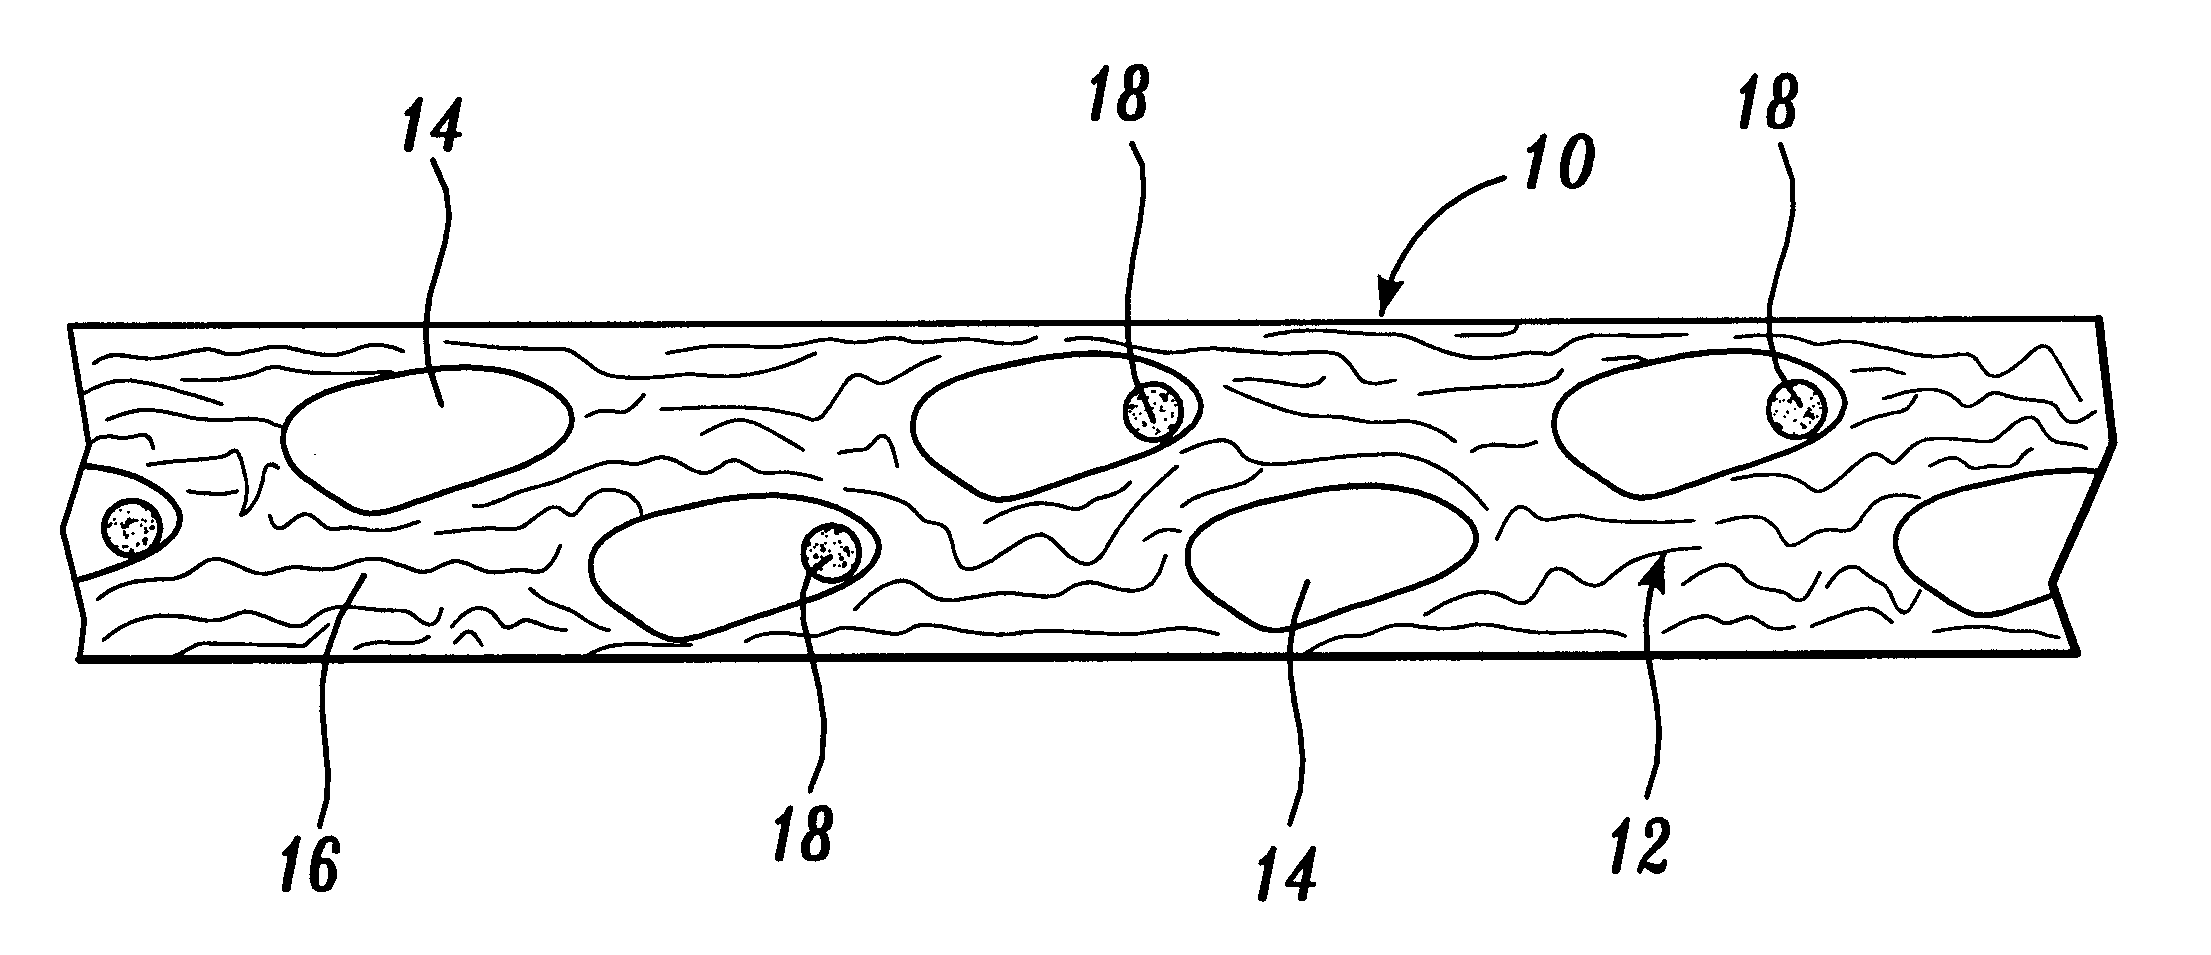 Reticulated absorbent composite